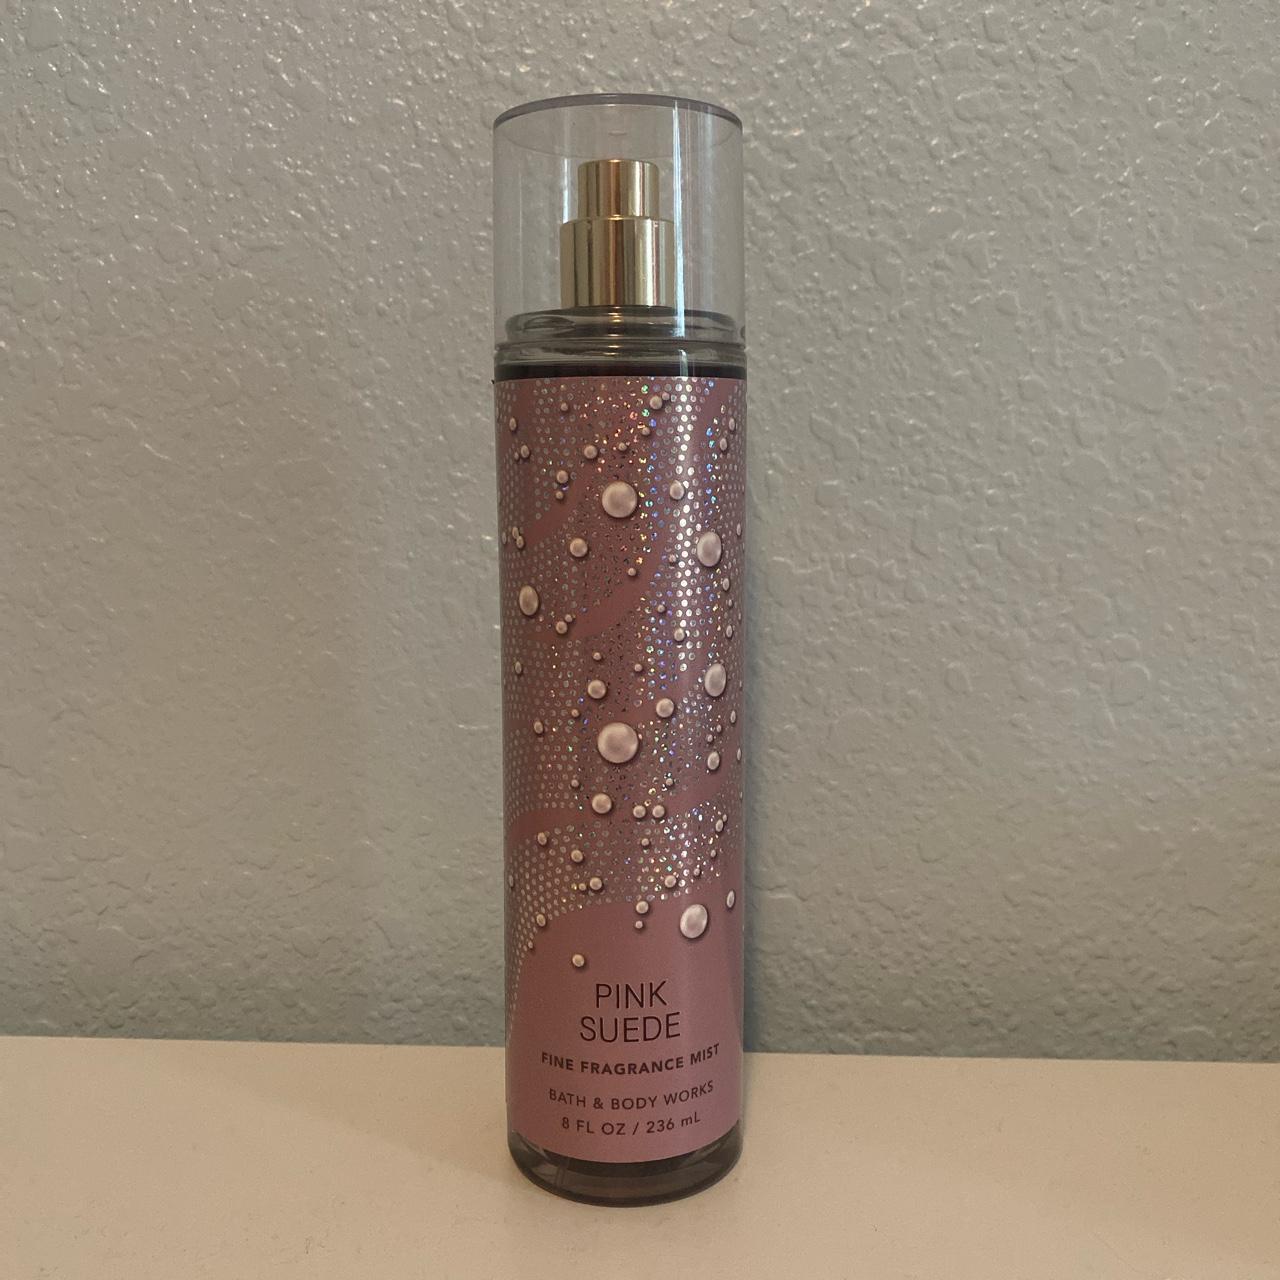 Pink Suede Fine Fragrance Mist | Bath and Body Works